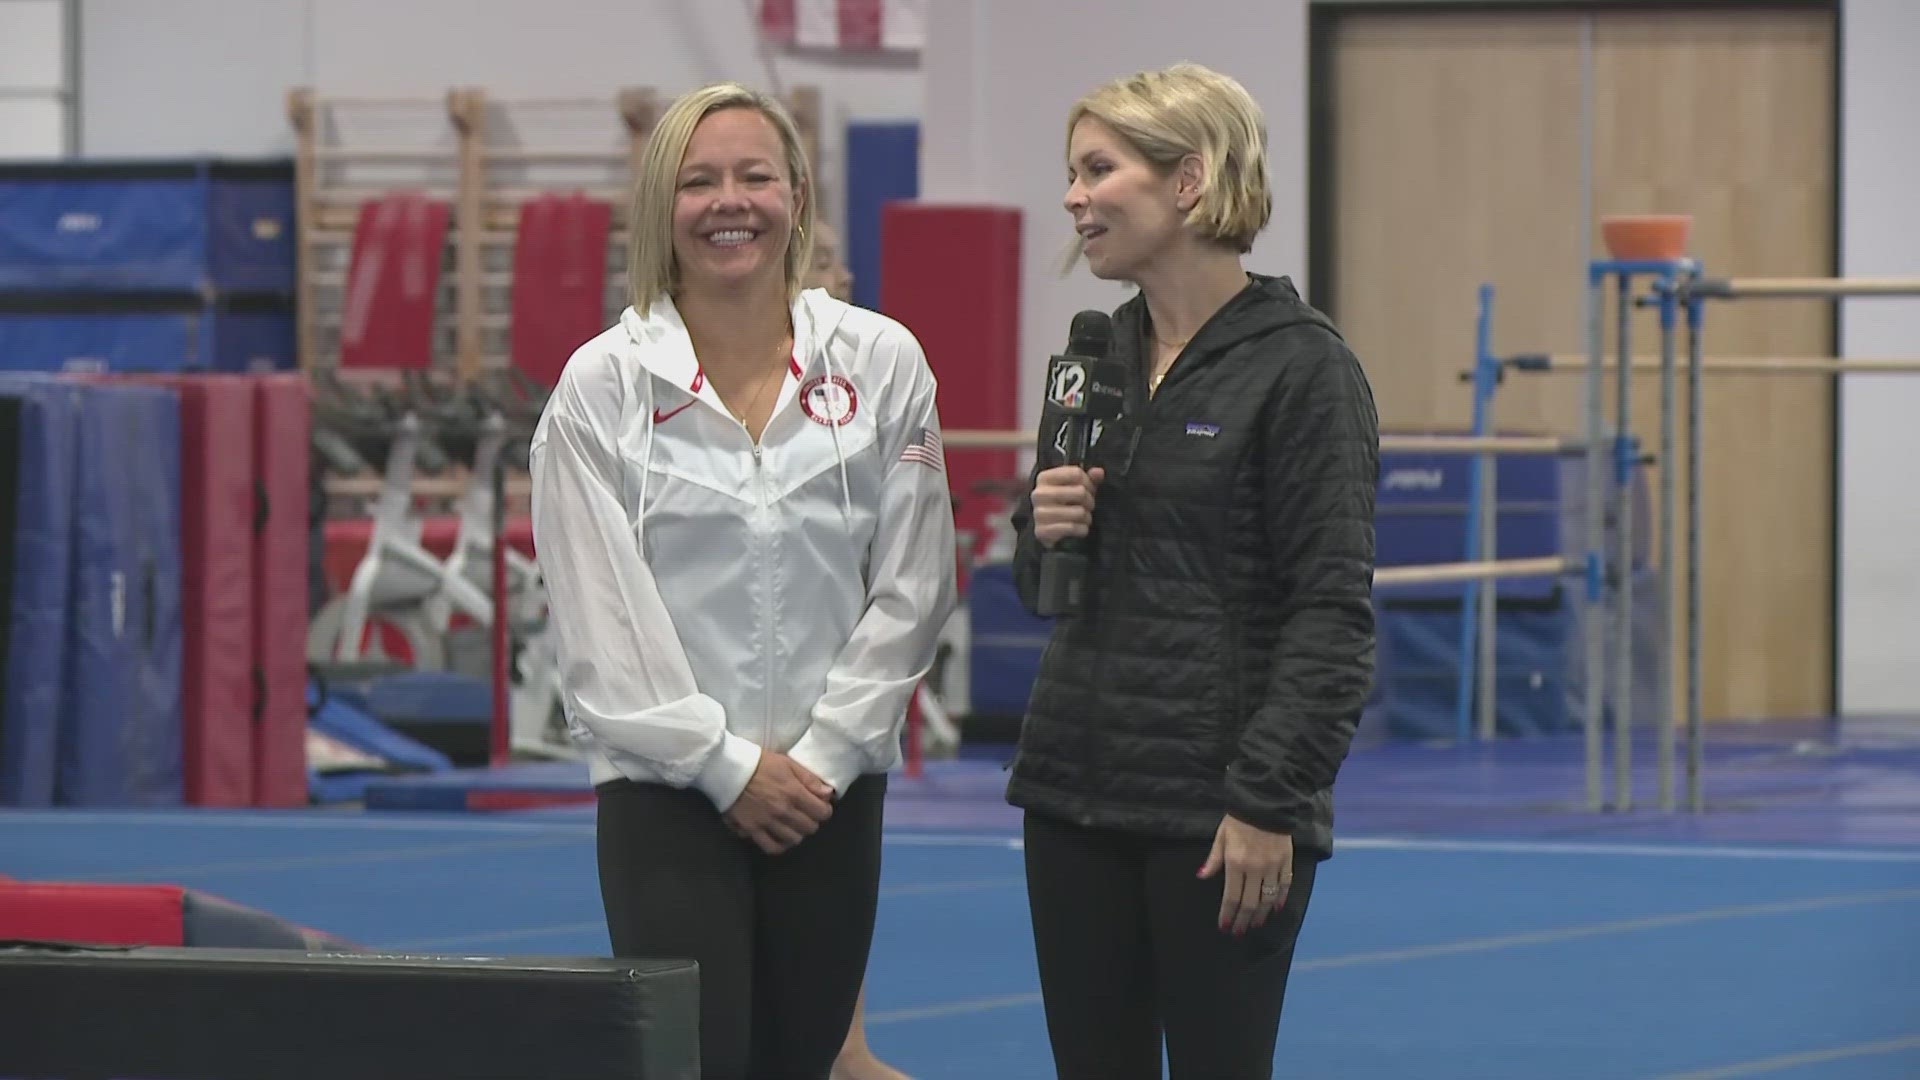 Amanda Borden was the captain of the gold medal-winning United States team in the 1996 Summer Olympics. Now she's training new gymnasts.